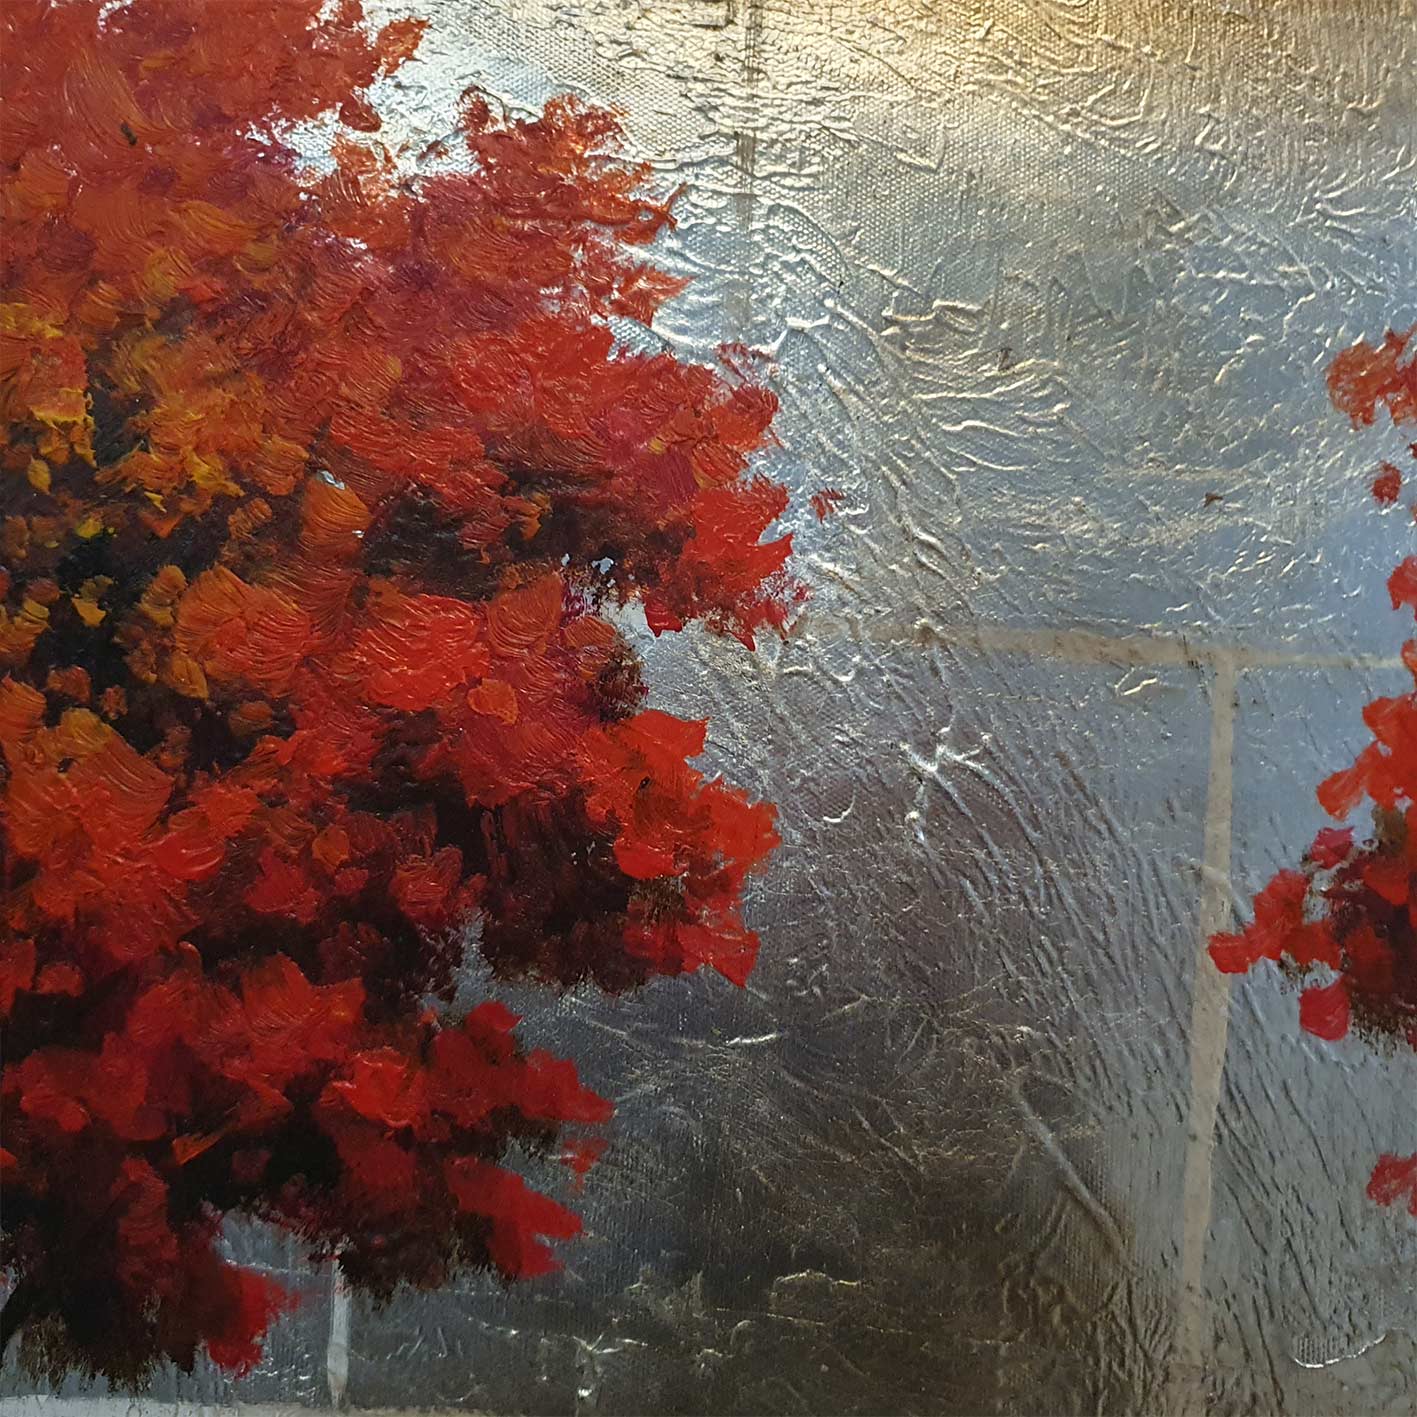 Trees Painting Silver Decoration 90x40 cm